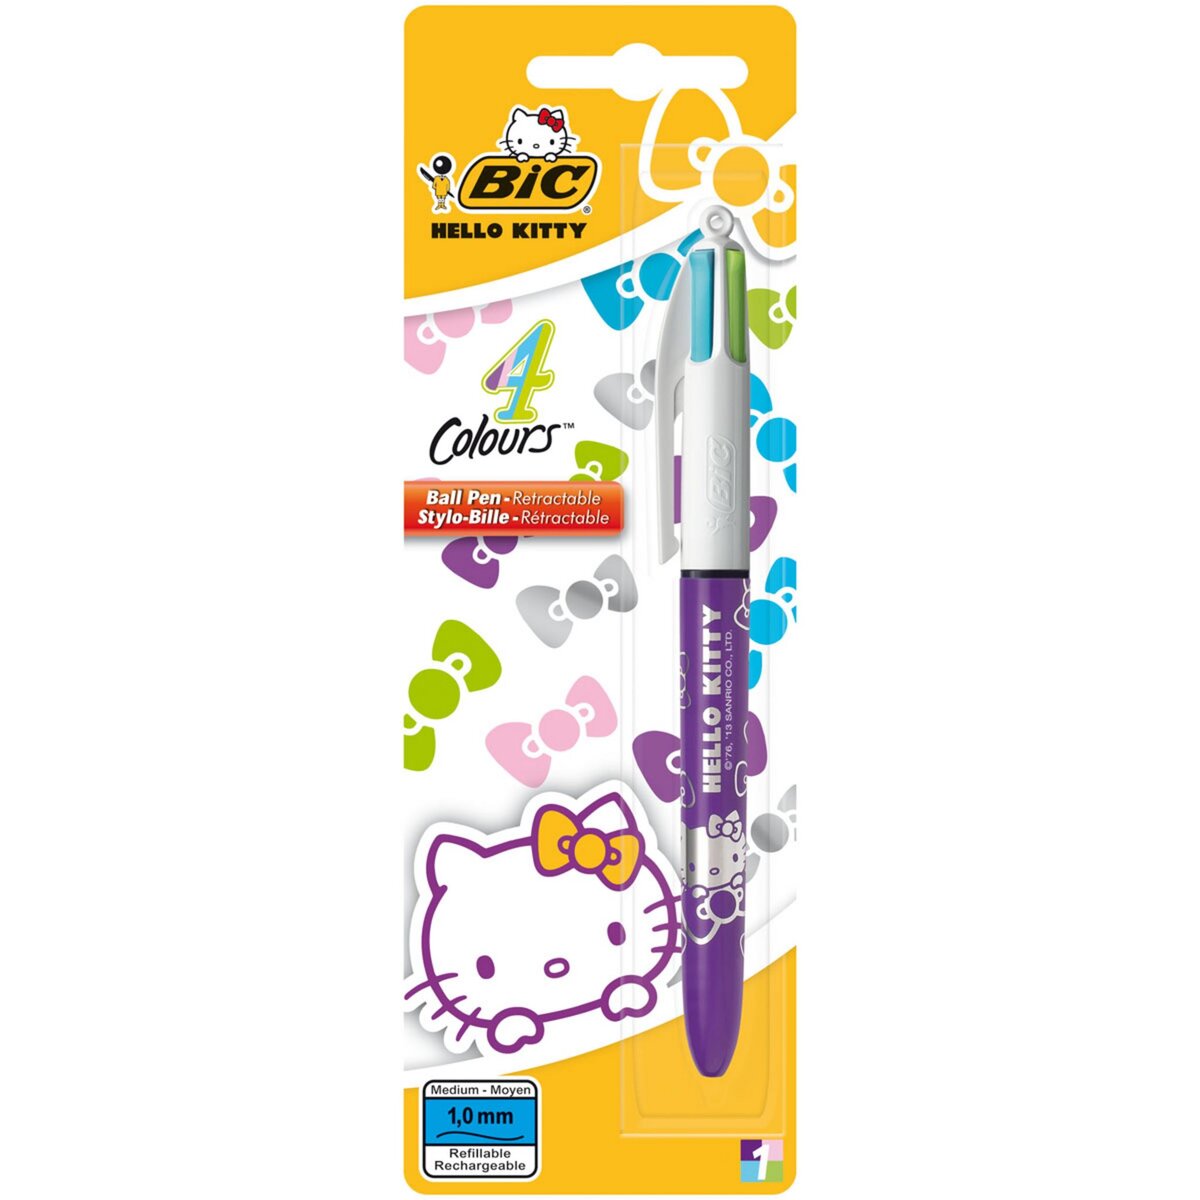 BIC Stylo bille 4 colours Hello Kitty pointe moyenne - assortiment fantaisie